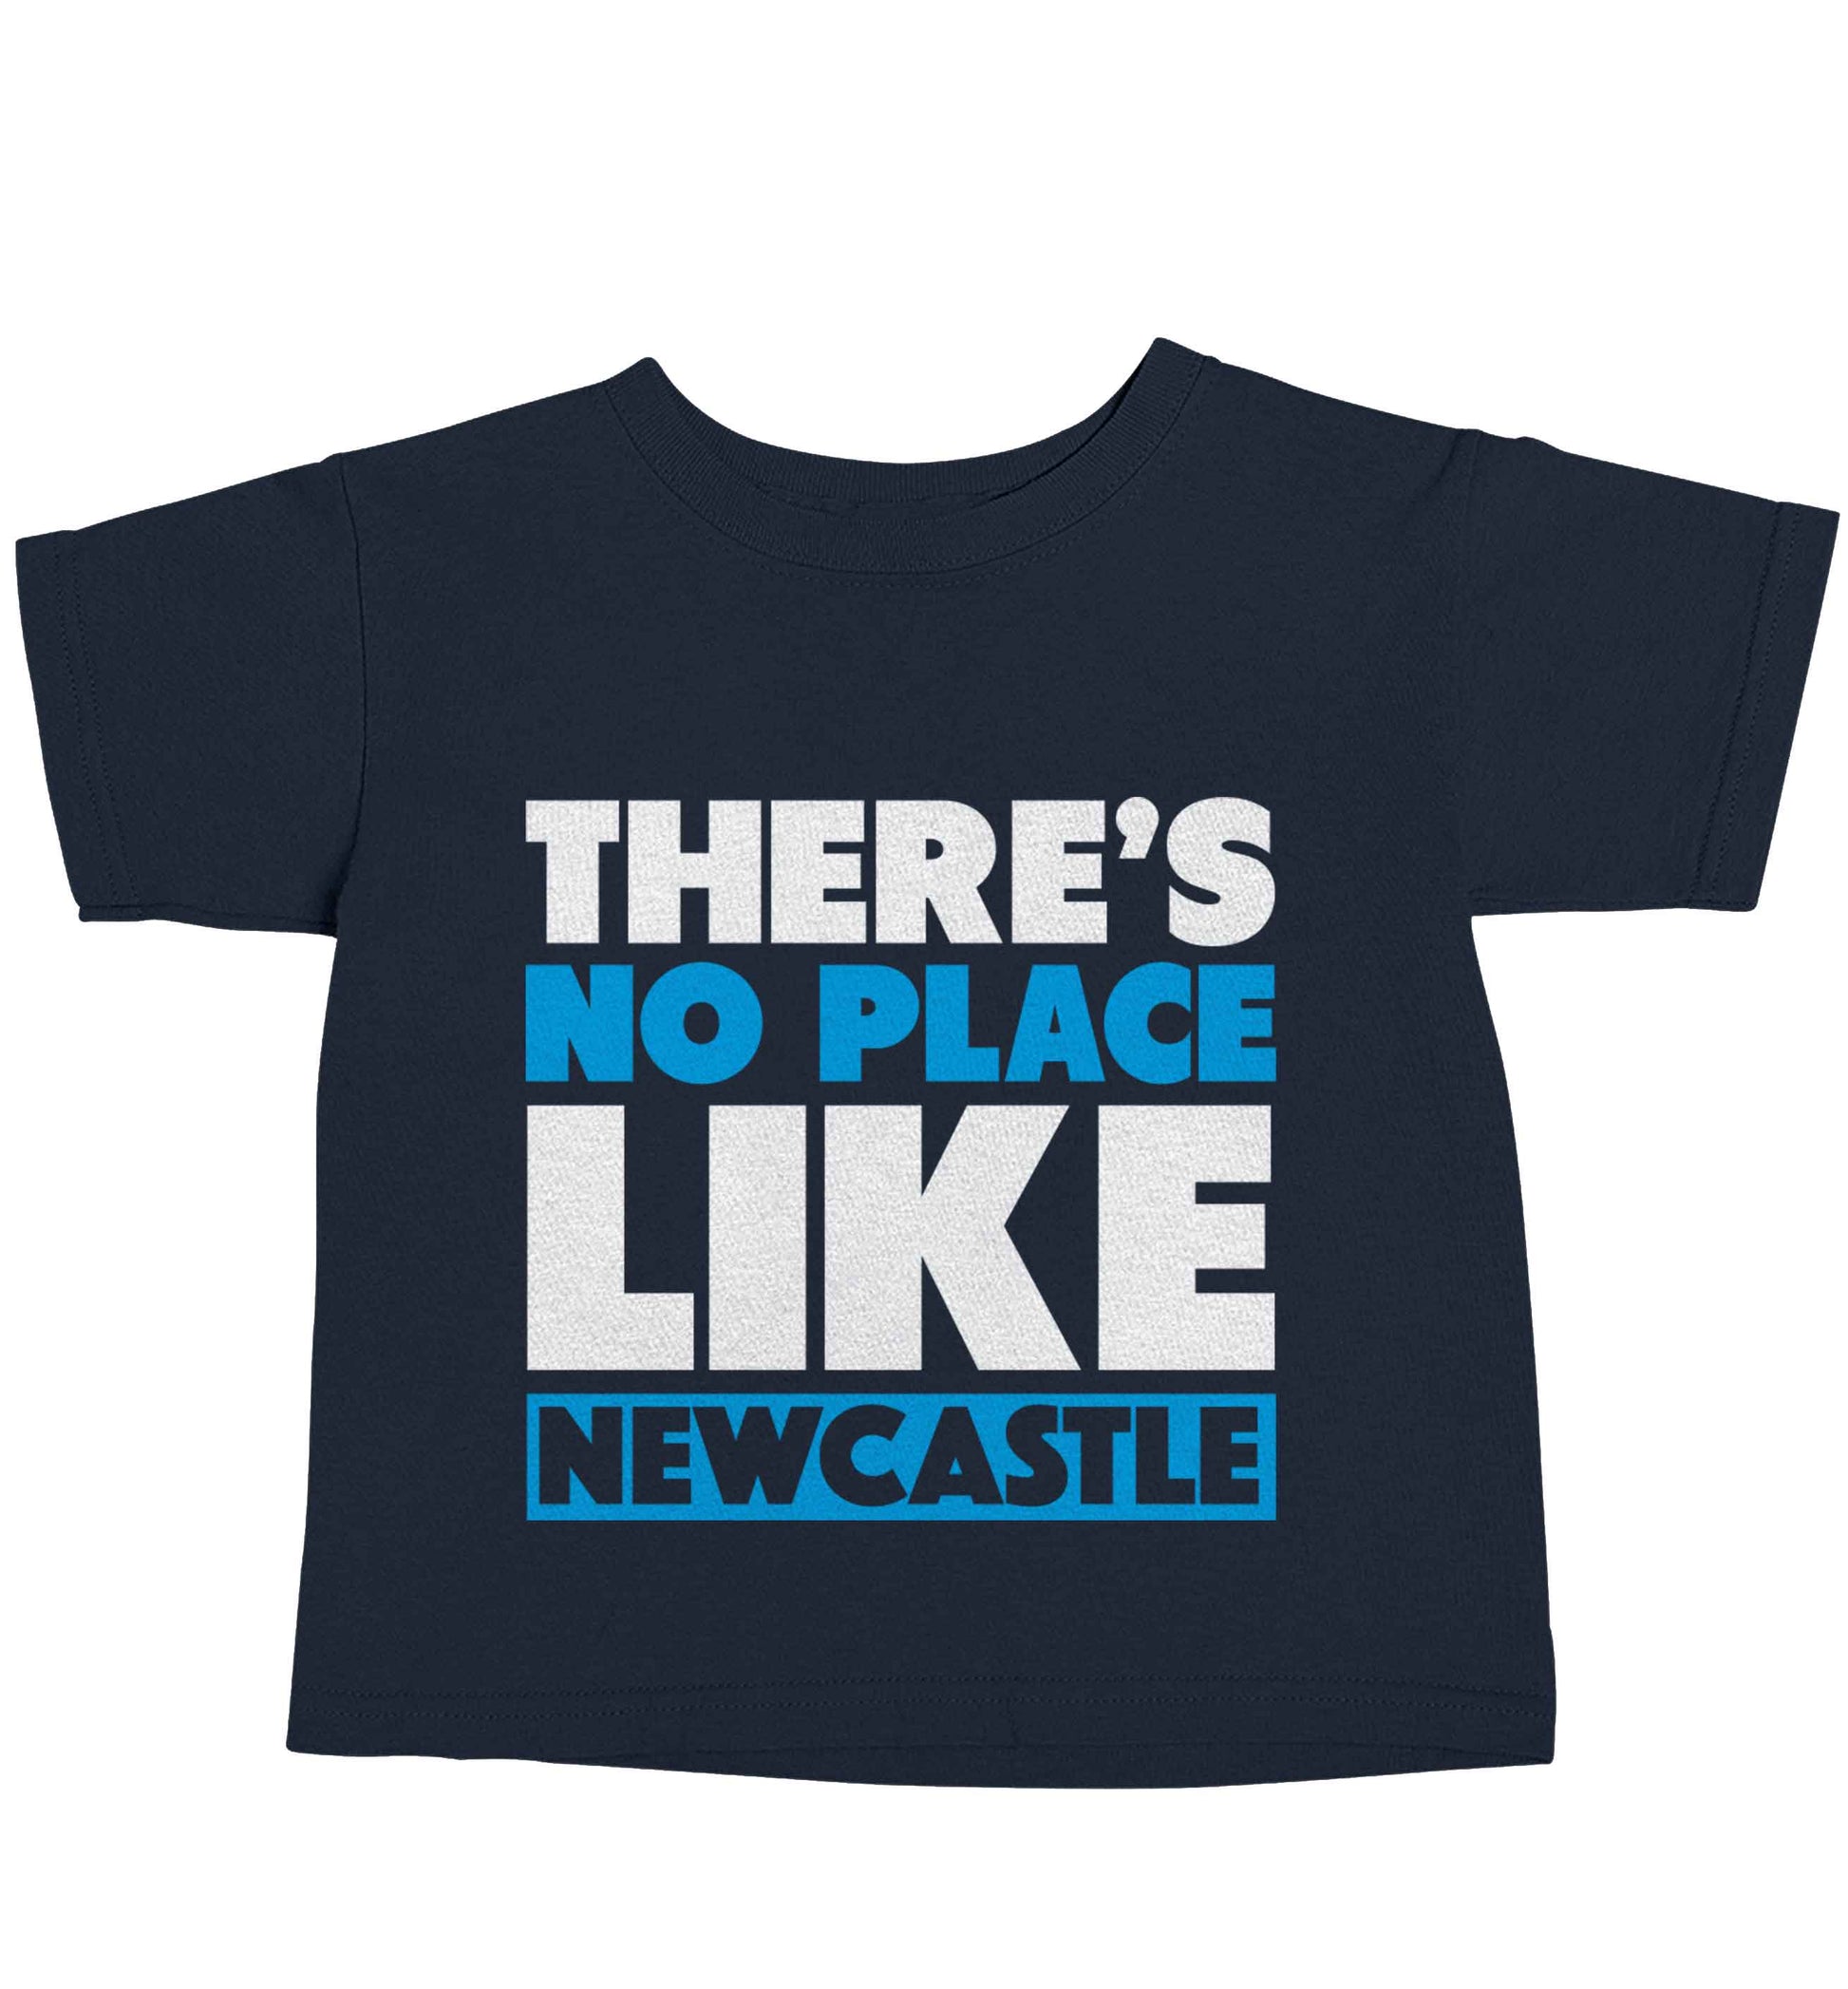 There's no place like Newcastle navy baby toddler Tshirt 2 Years